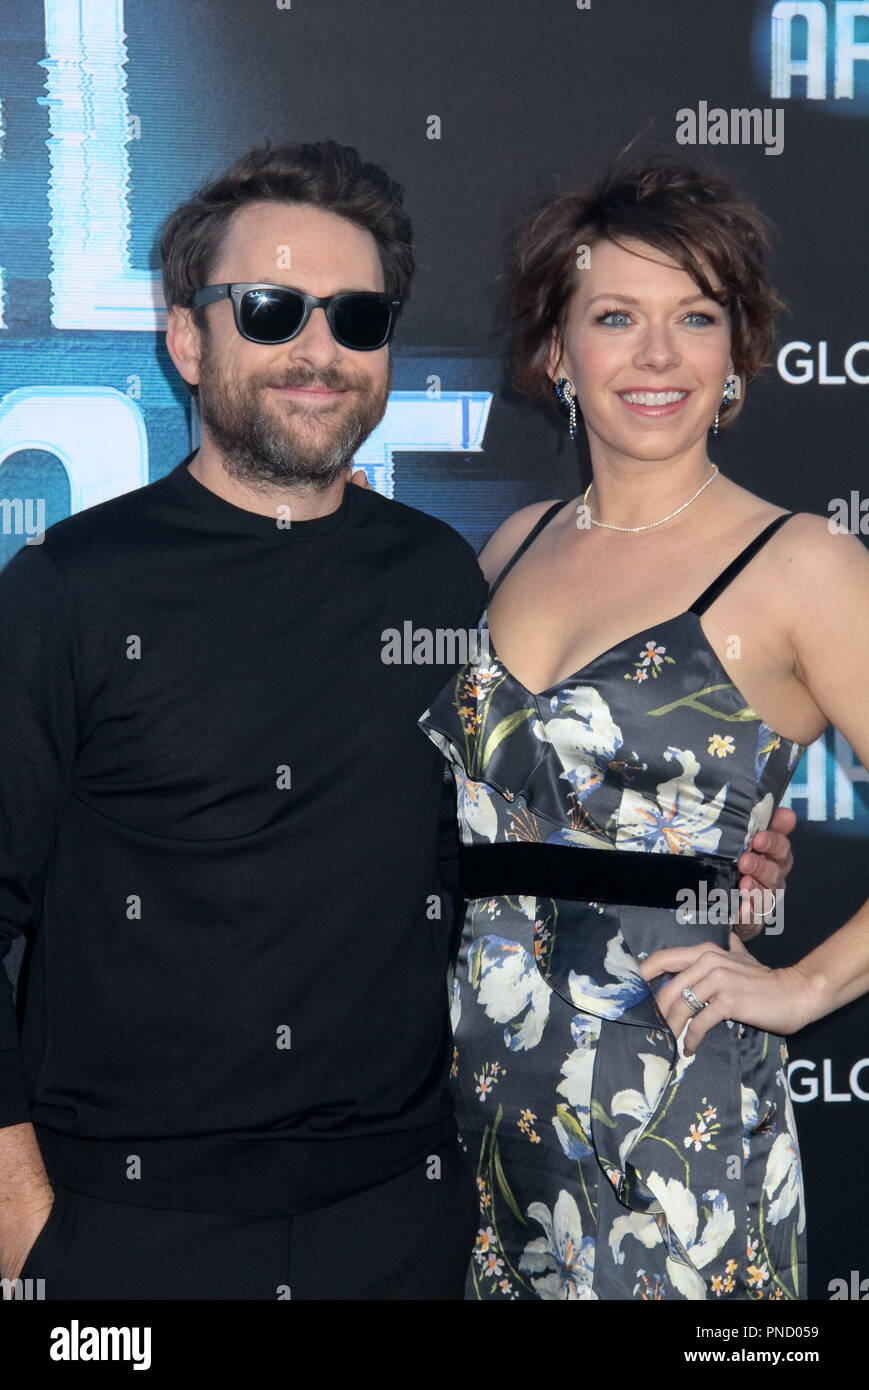 Charlie Day, Mary Elizabeth Ellis  05/19/2018 The Los Angeles premiere of 'Hotel Artemis' held at the Regency Bruin Theatre in Los Angeles, CA Photo by Izumi Hasegawa / HNW / PictureLux Stock Photo